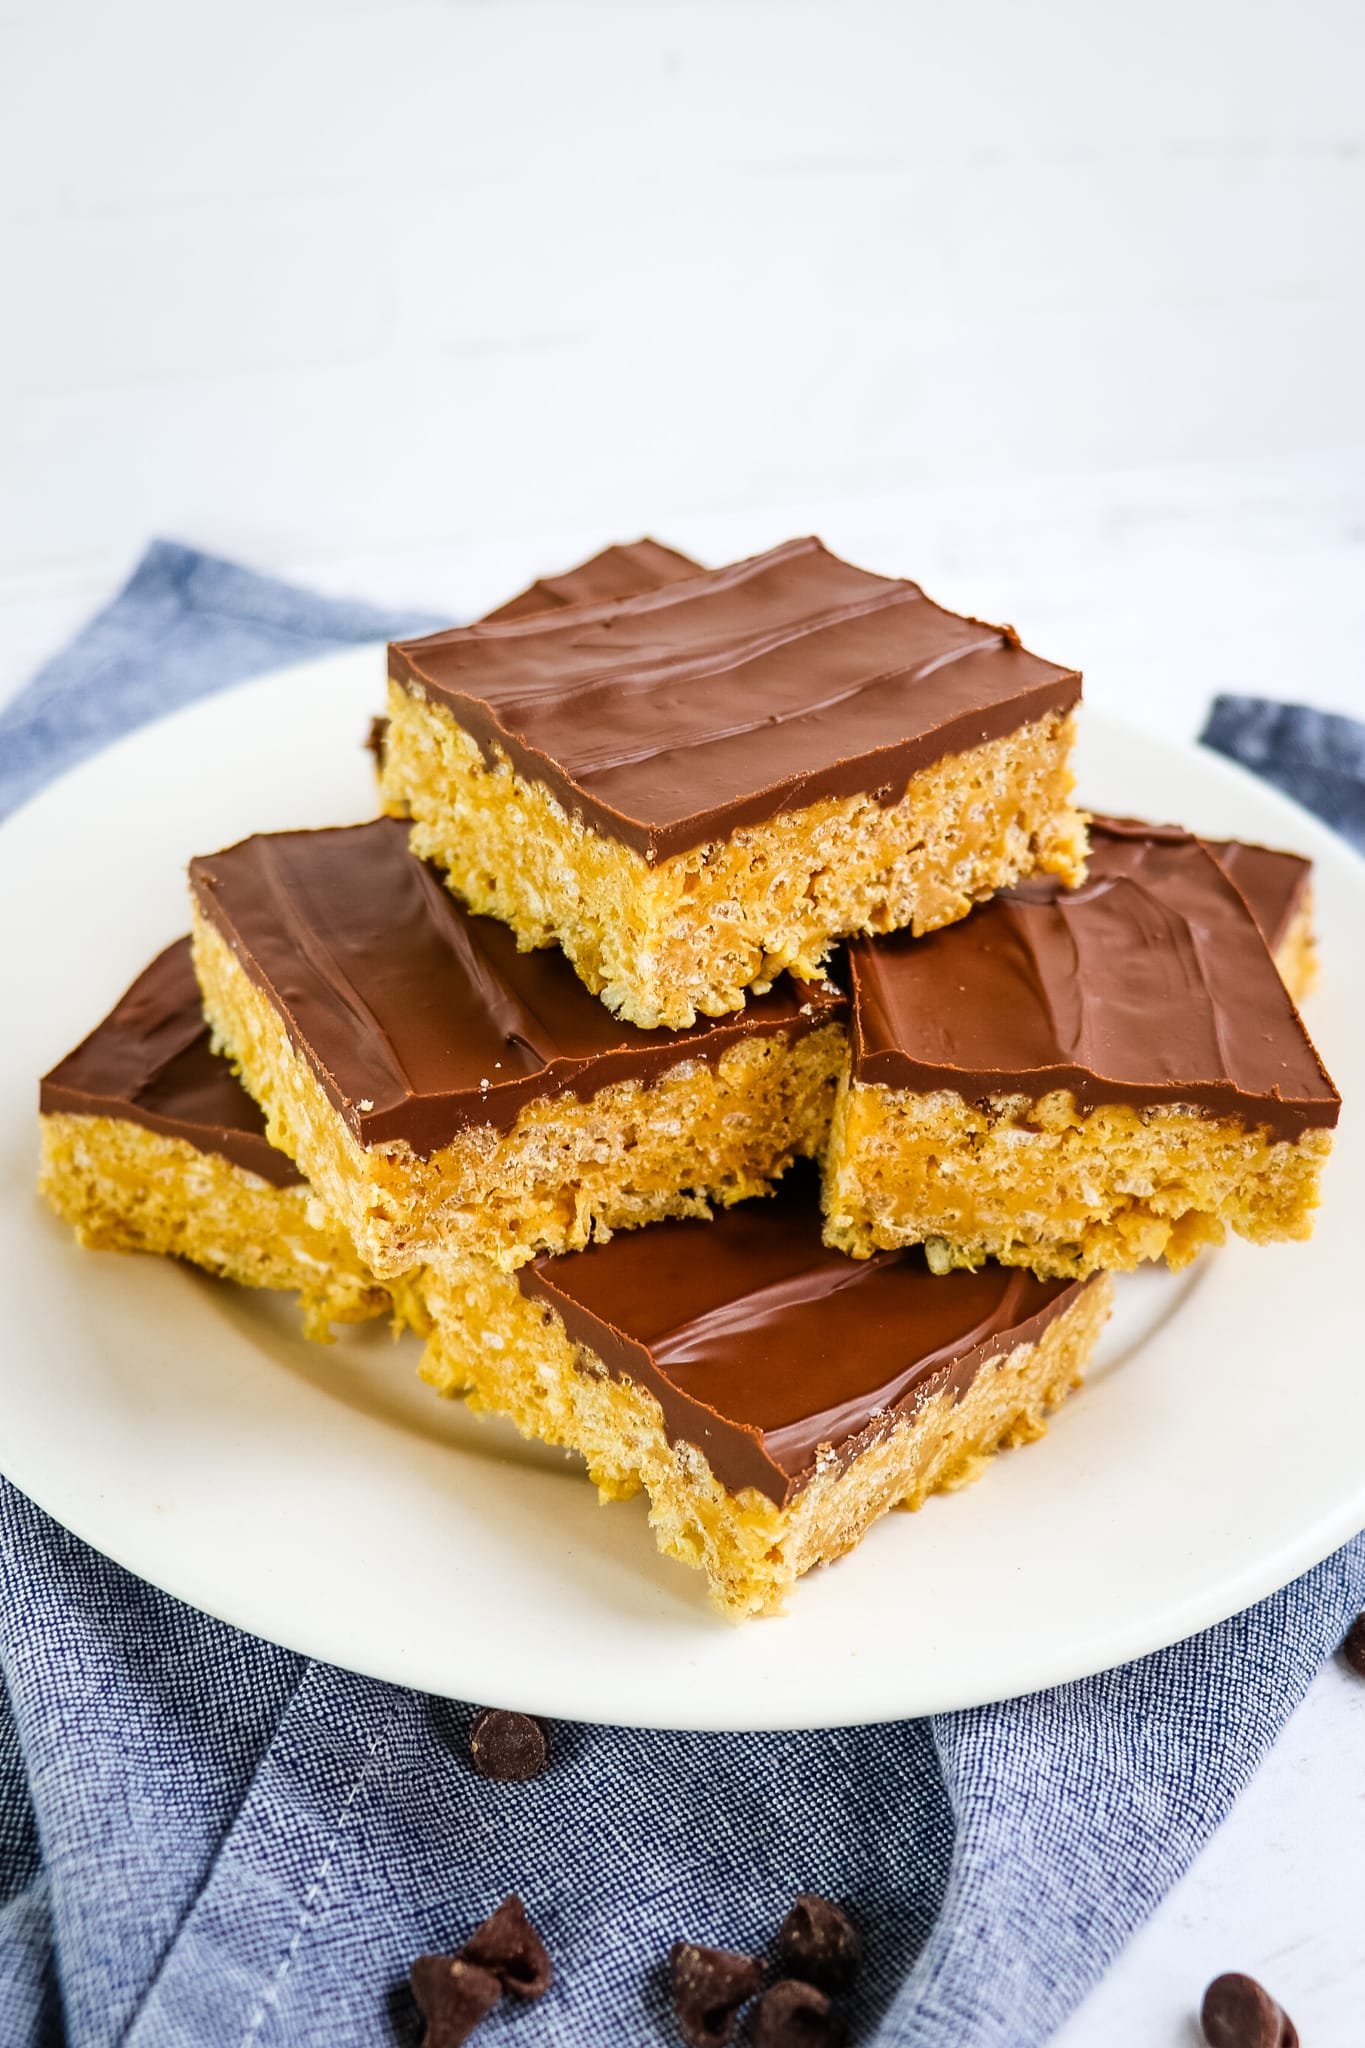 Chocolate peanut butter rice krispie treats, stacked on a plate.